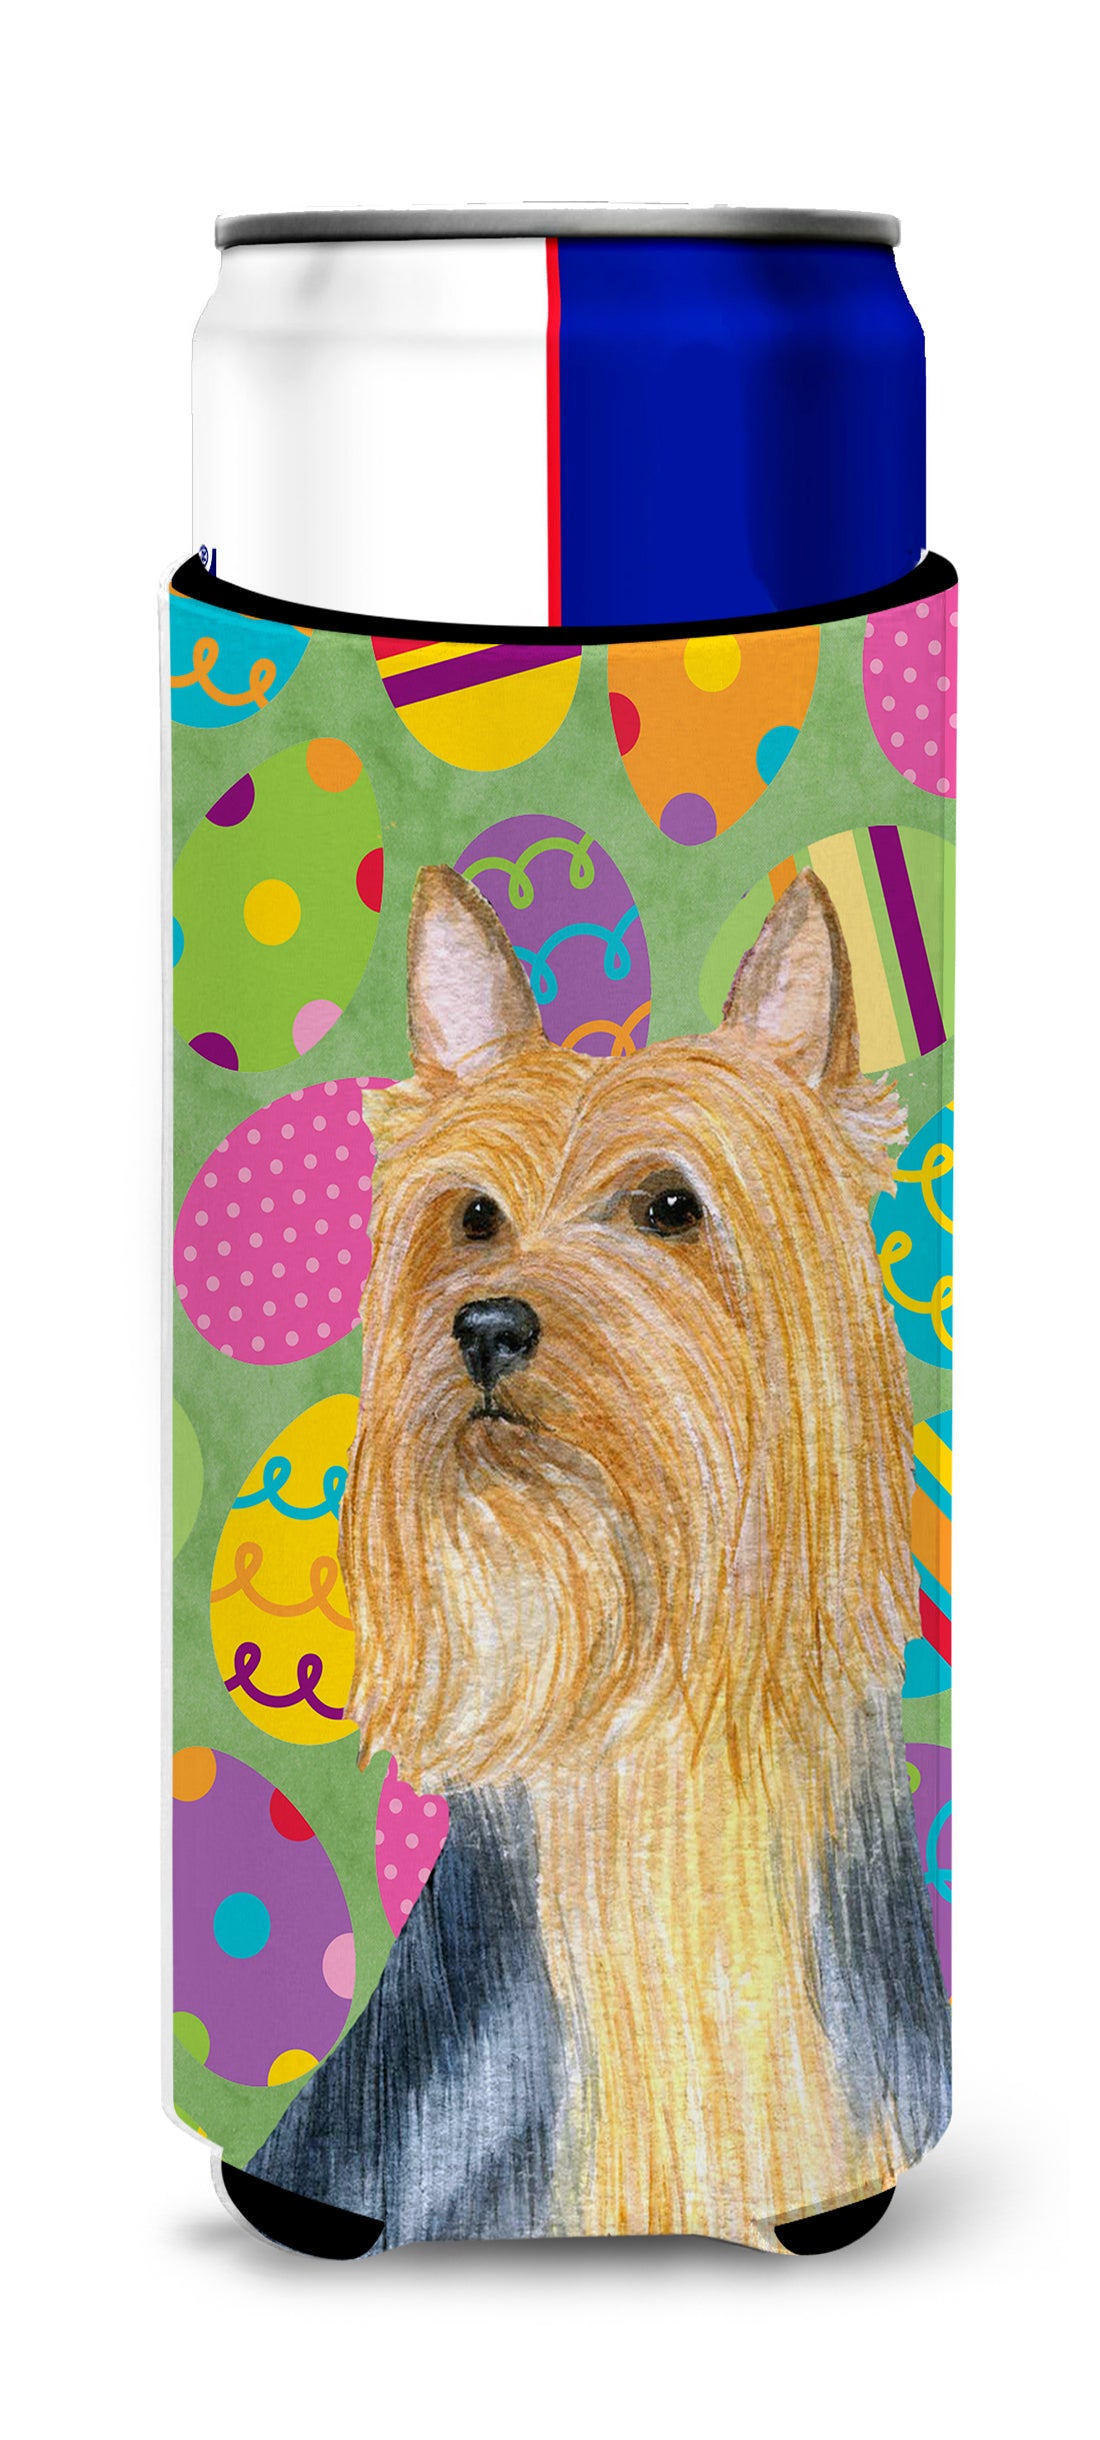 Silky Terrier Easter Eggtravaganza Ultra Beverage Insulators for slim cans LH9406MUK